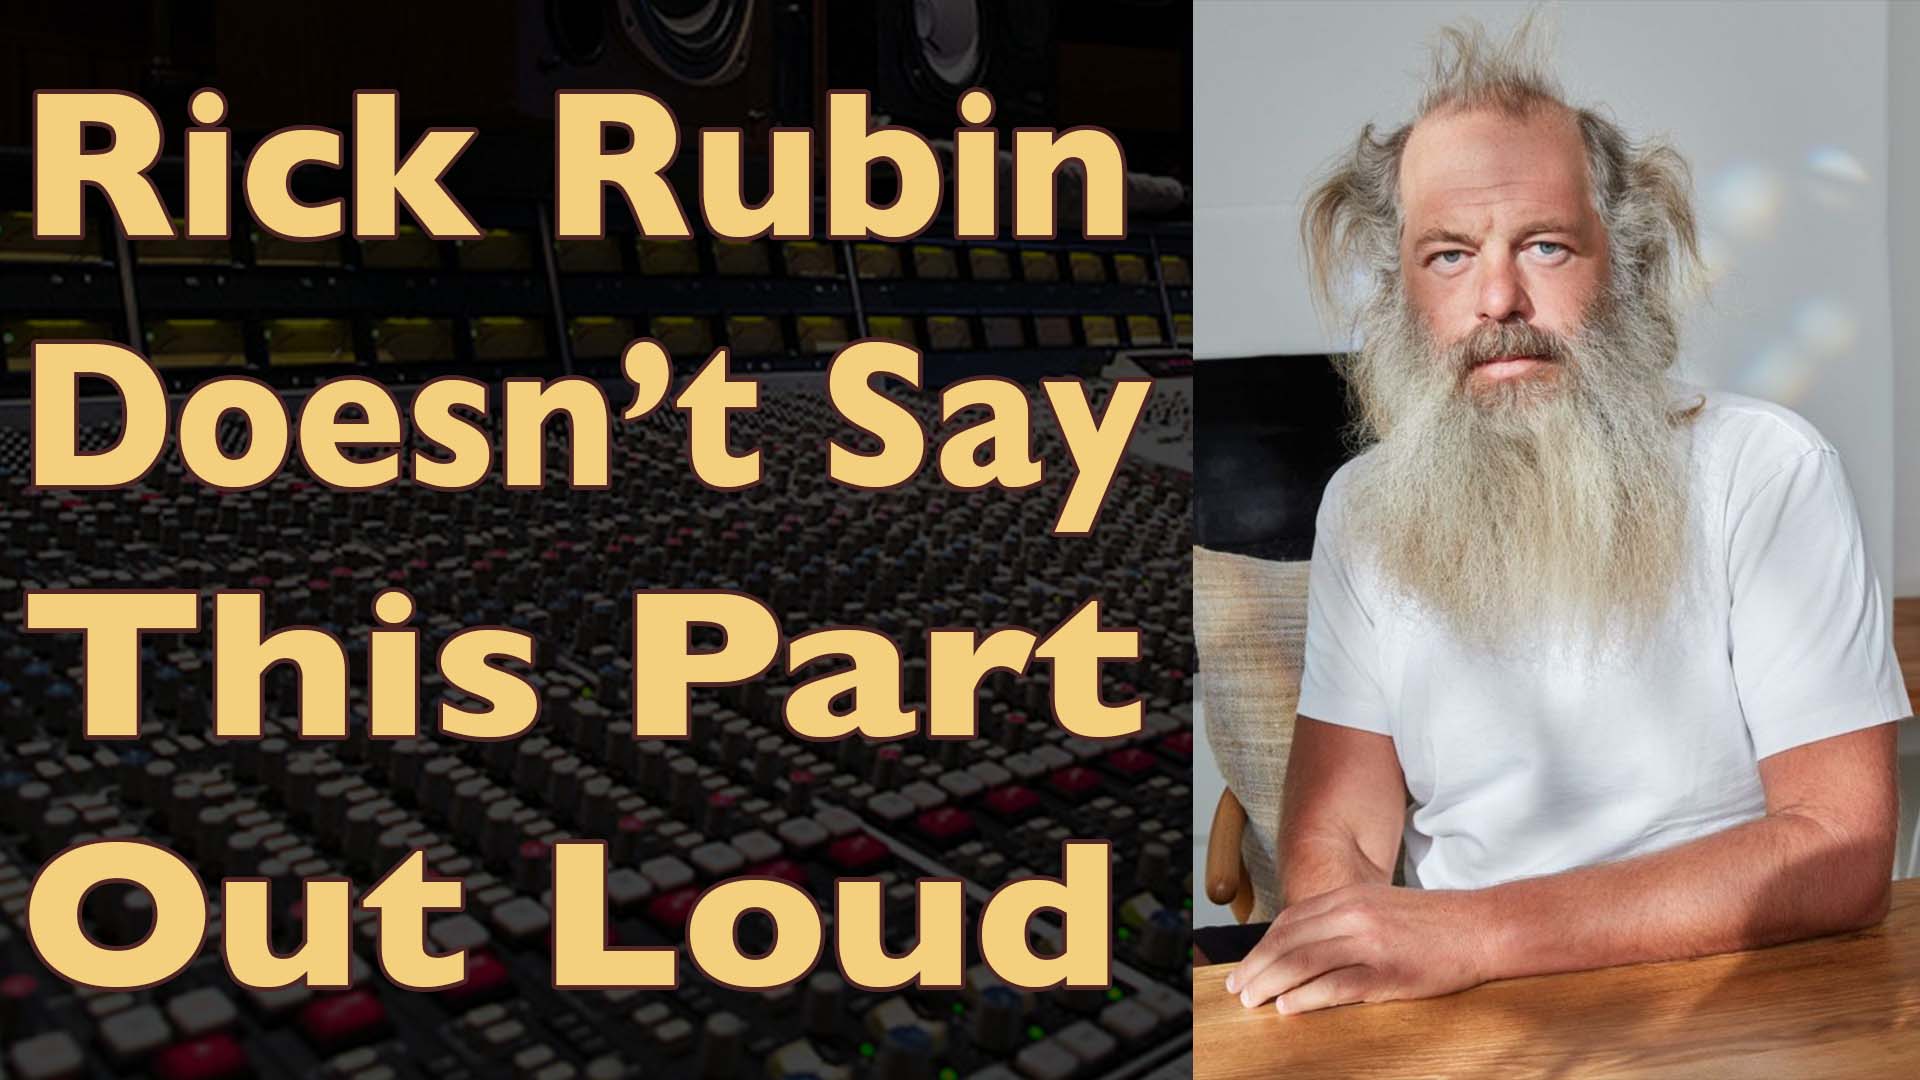 Rick Rubin’s Top 10 Insights for Music Producers (…Read between the lines.)